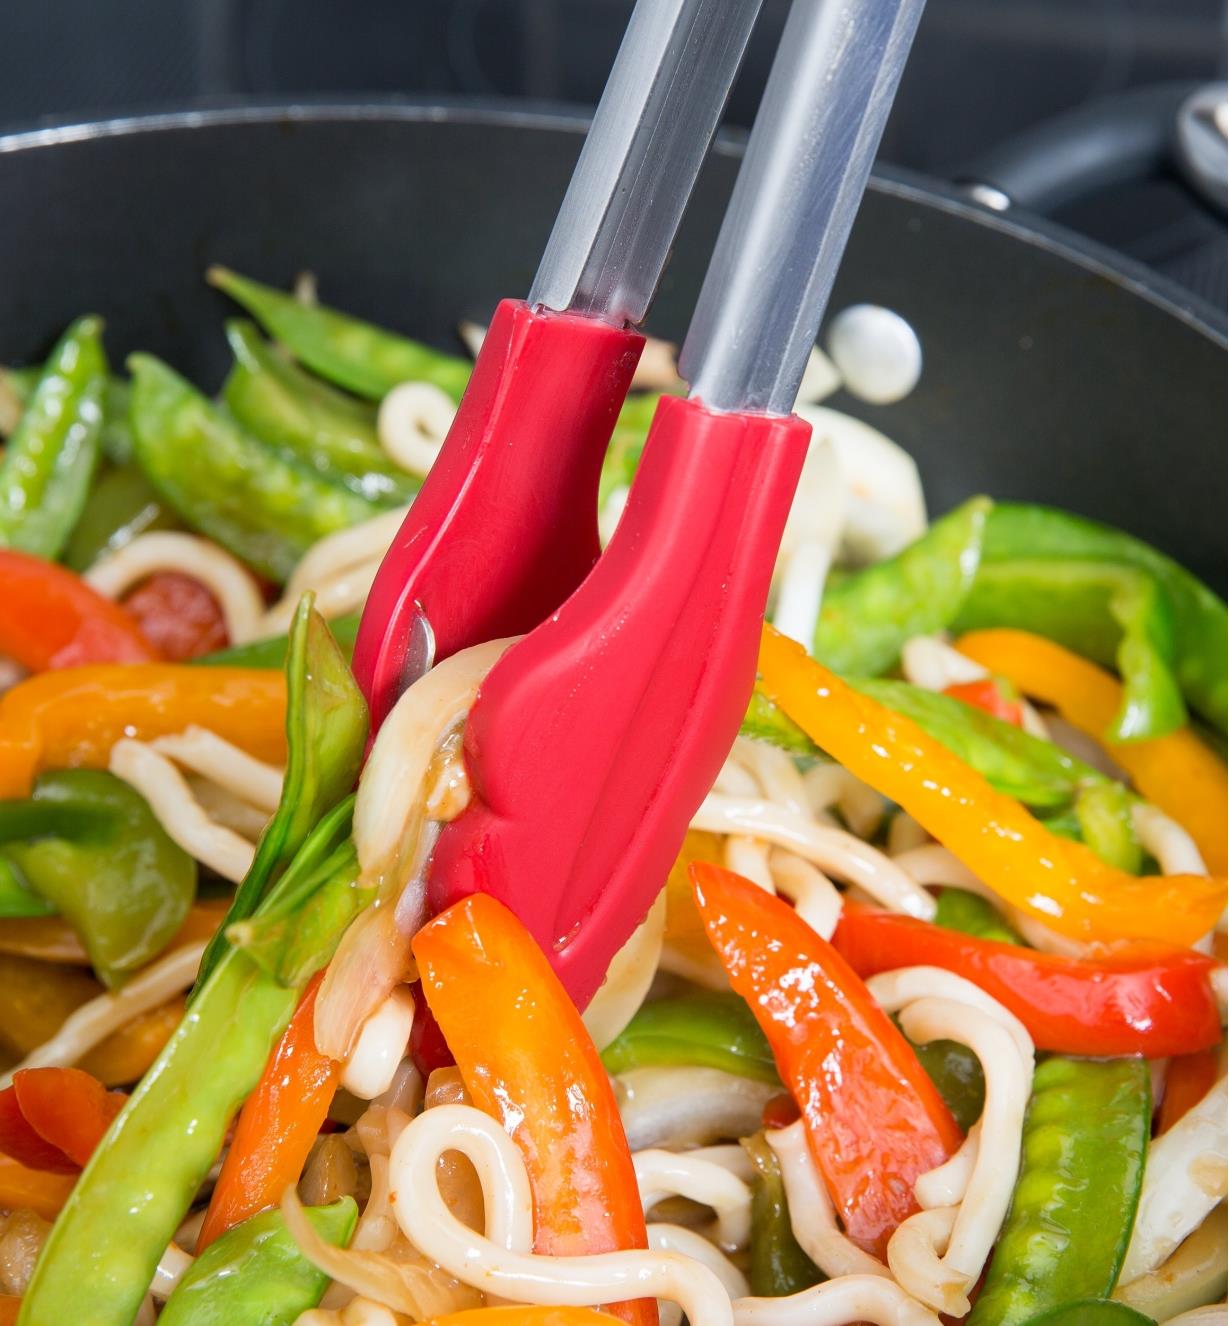 Using Silicone Tongs with Teeth to pick up stir fry from a pan